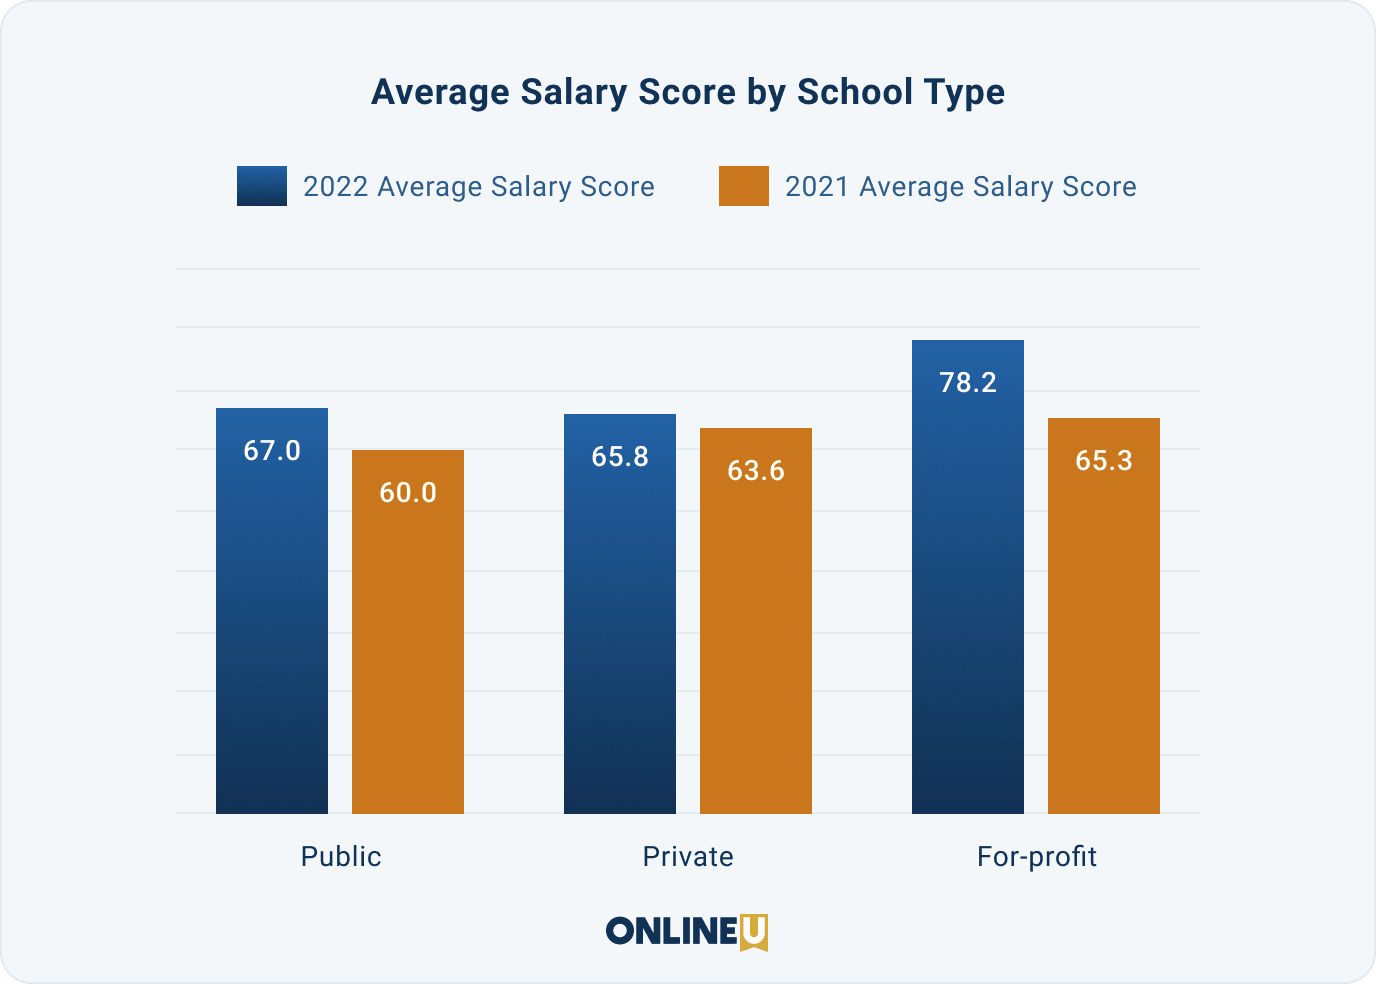 Graph showing different college types' average Salary Scores